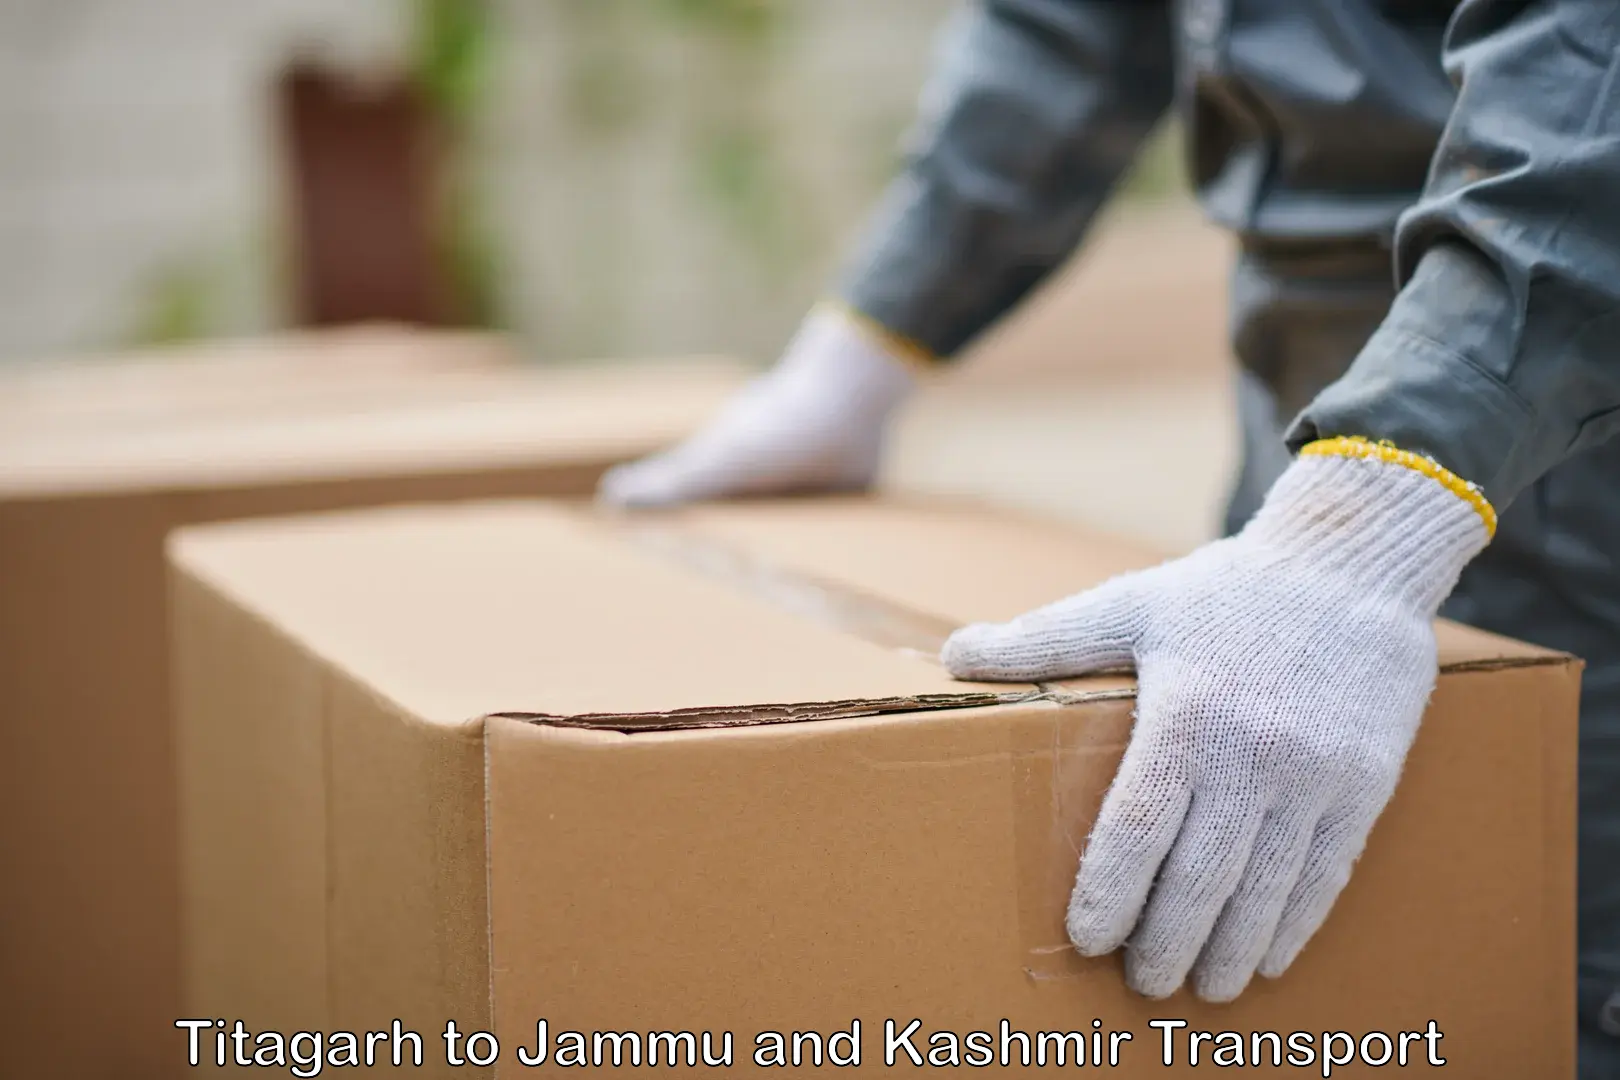 Lorry transport service in Titagarh to Jammu and Kashmir